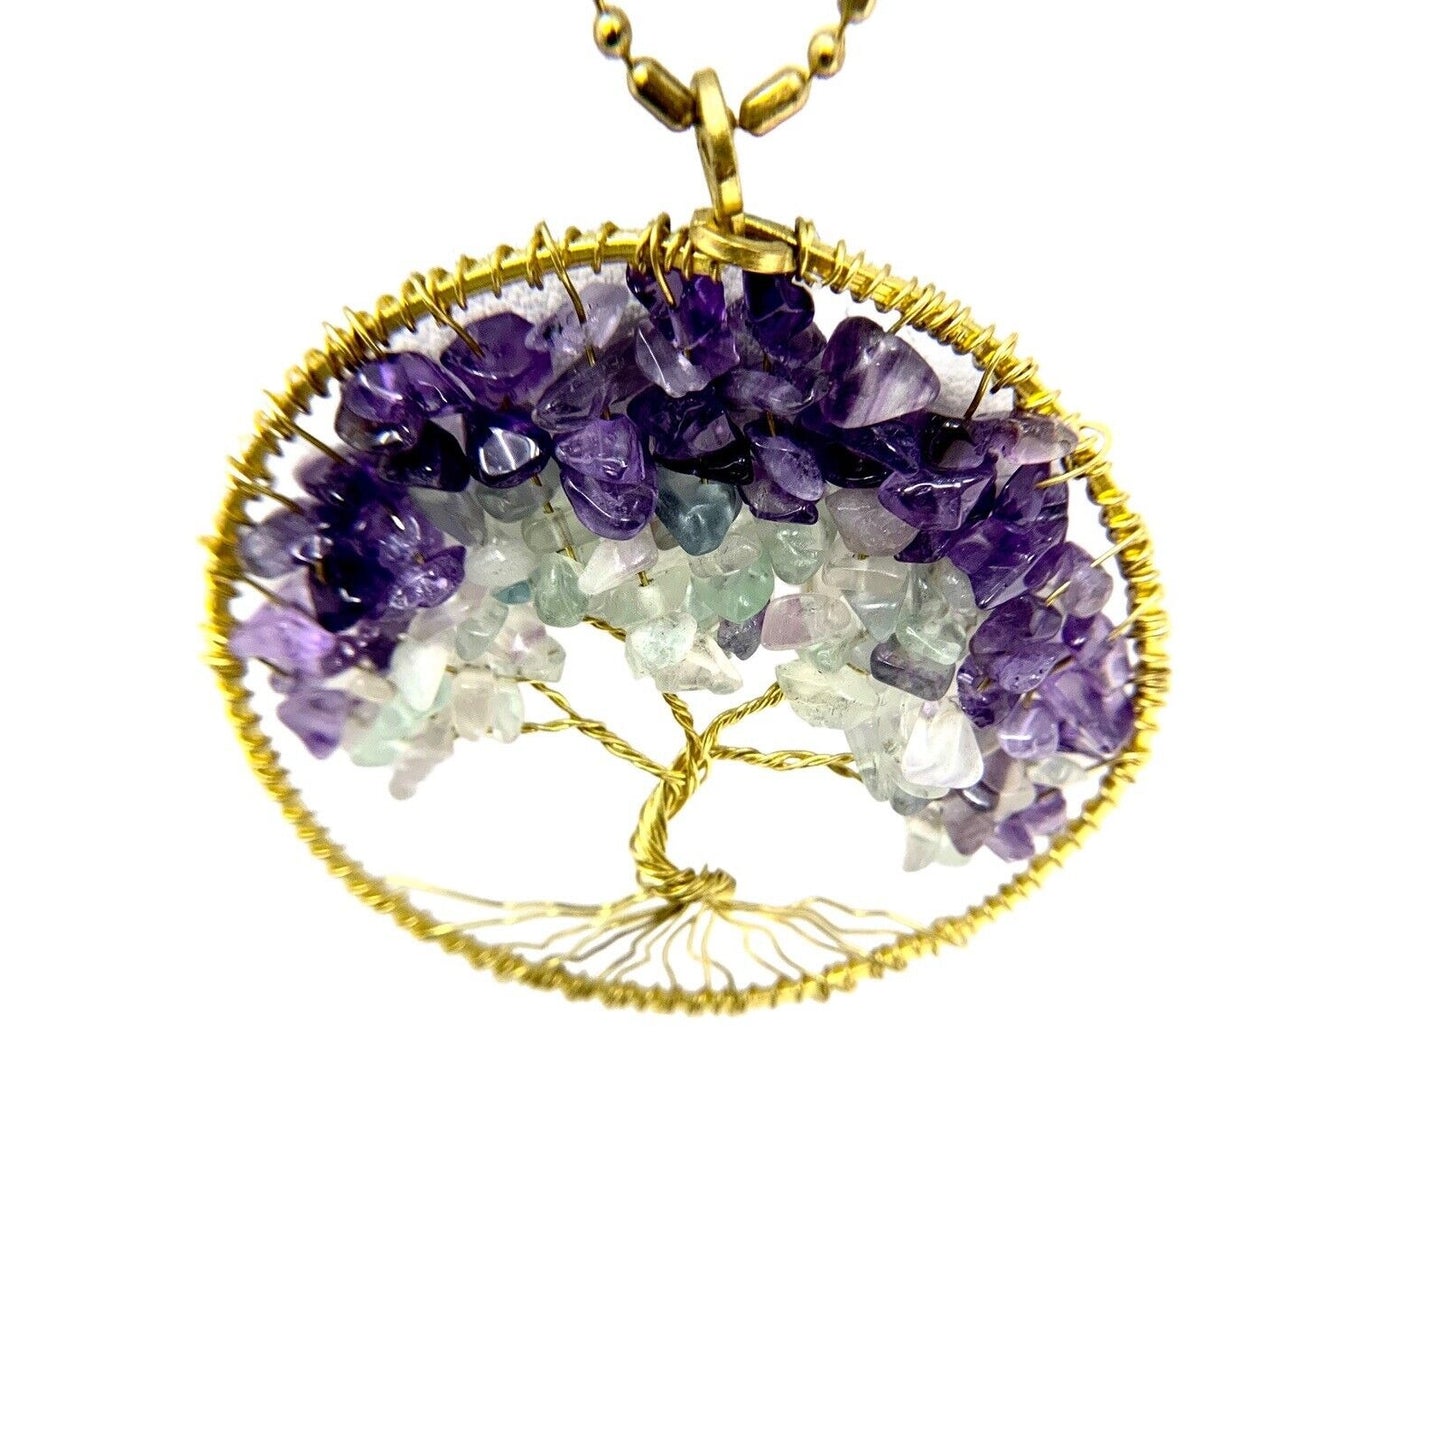 Tree of Life Brass Pendant Necklace with Precious Stones